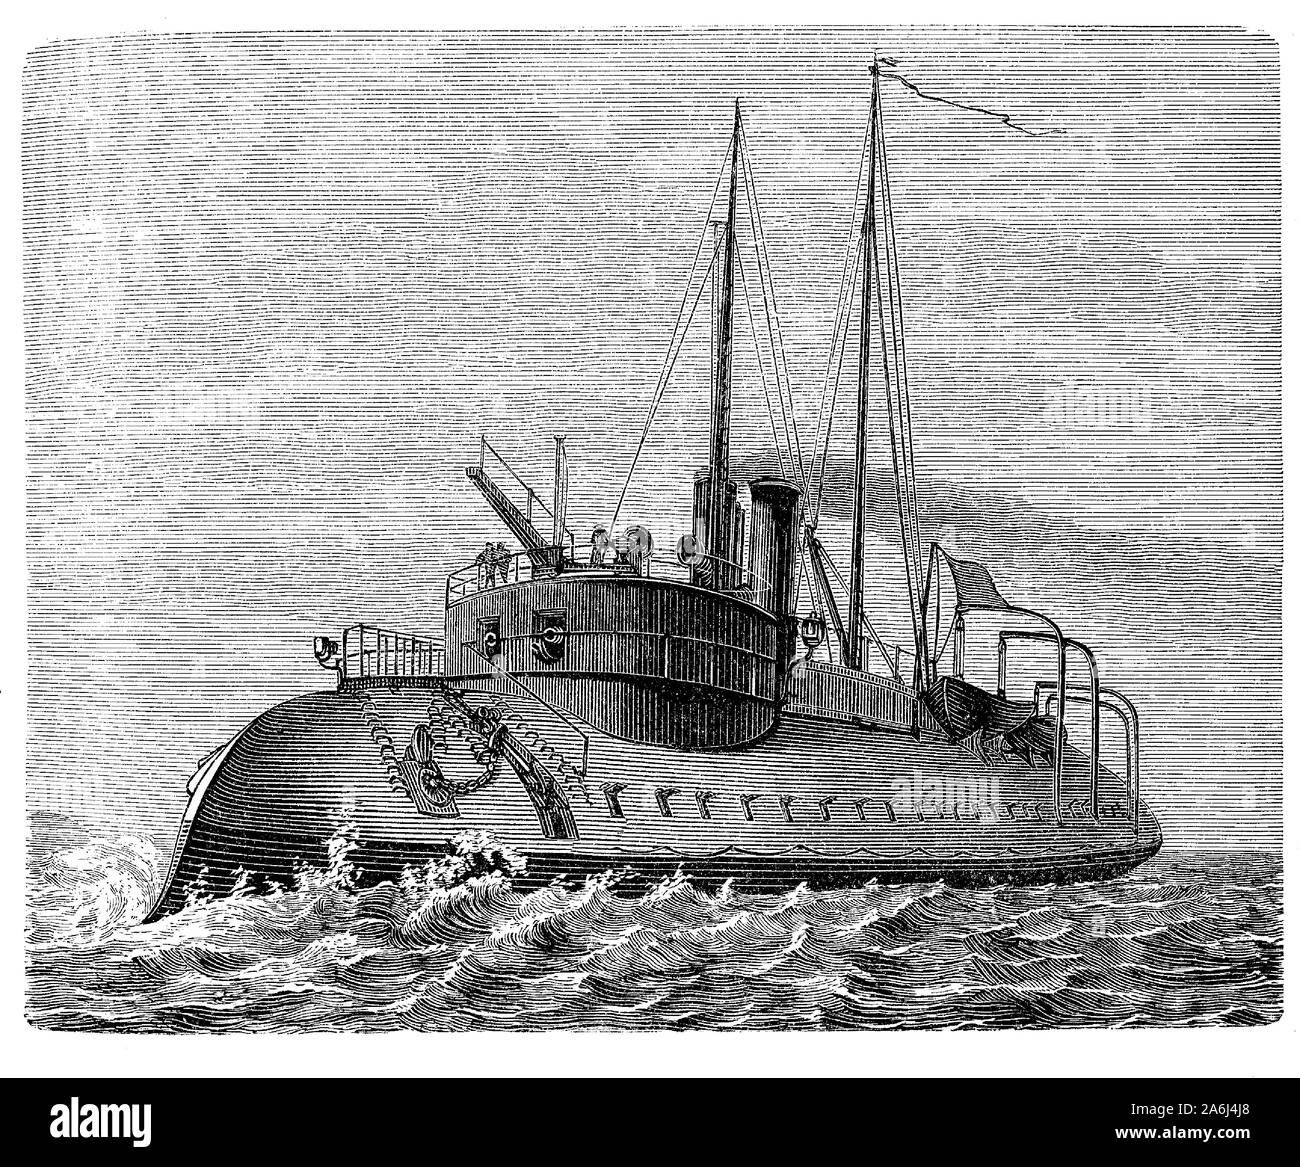 Tigre French ironclad battleship ram of 1871 with an underwater armored beak at the bow to sink the enemy ship Stock Photo